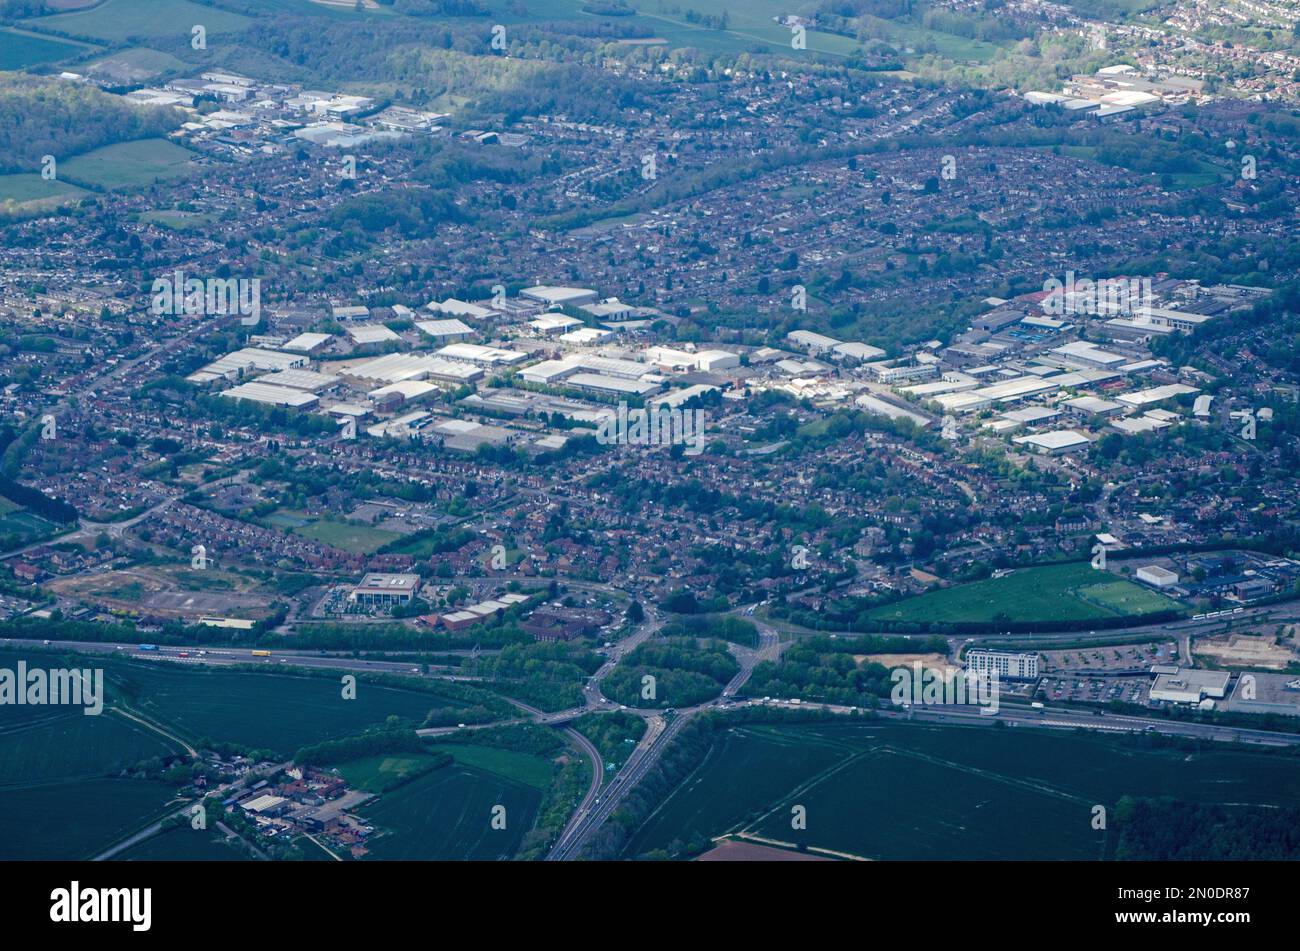 Aerial view of the Cressex Industrial Estate and Cressex Business Park district of High Wycombe with the junction between the M40 motorway and A404 tr Stock Photo